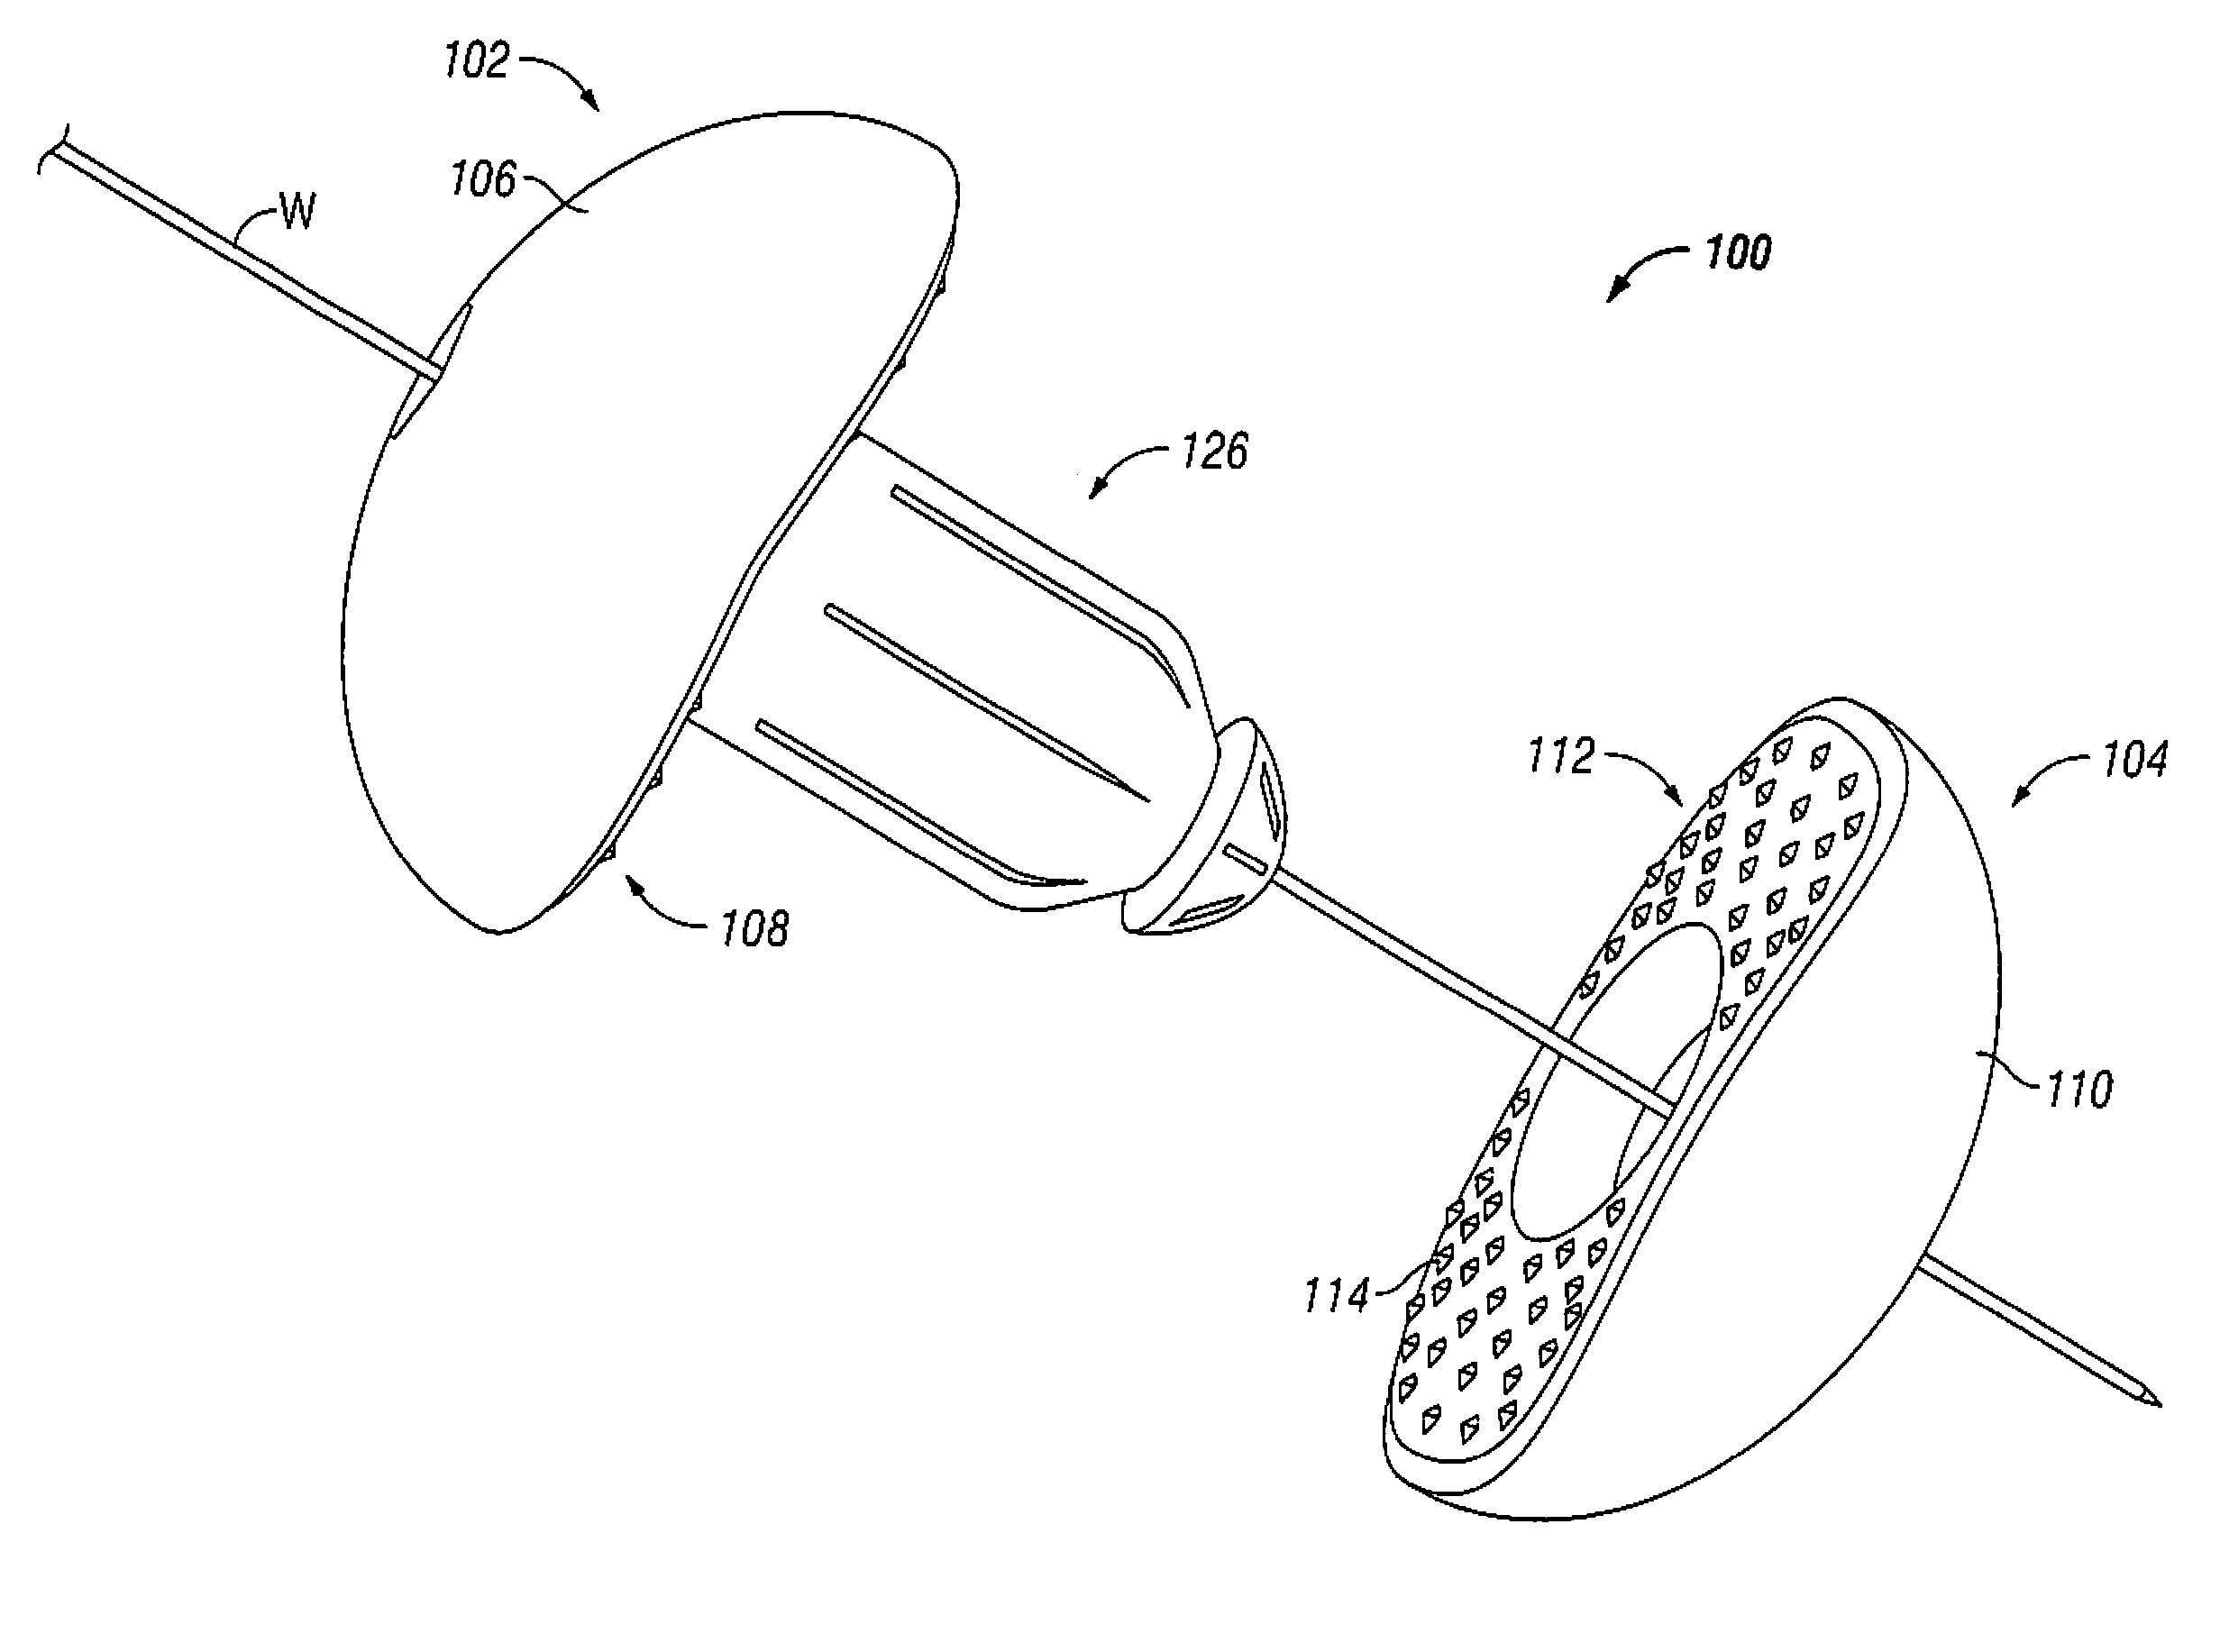 Percutaneous interspinous process device and method